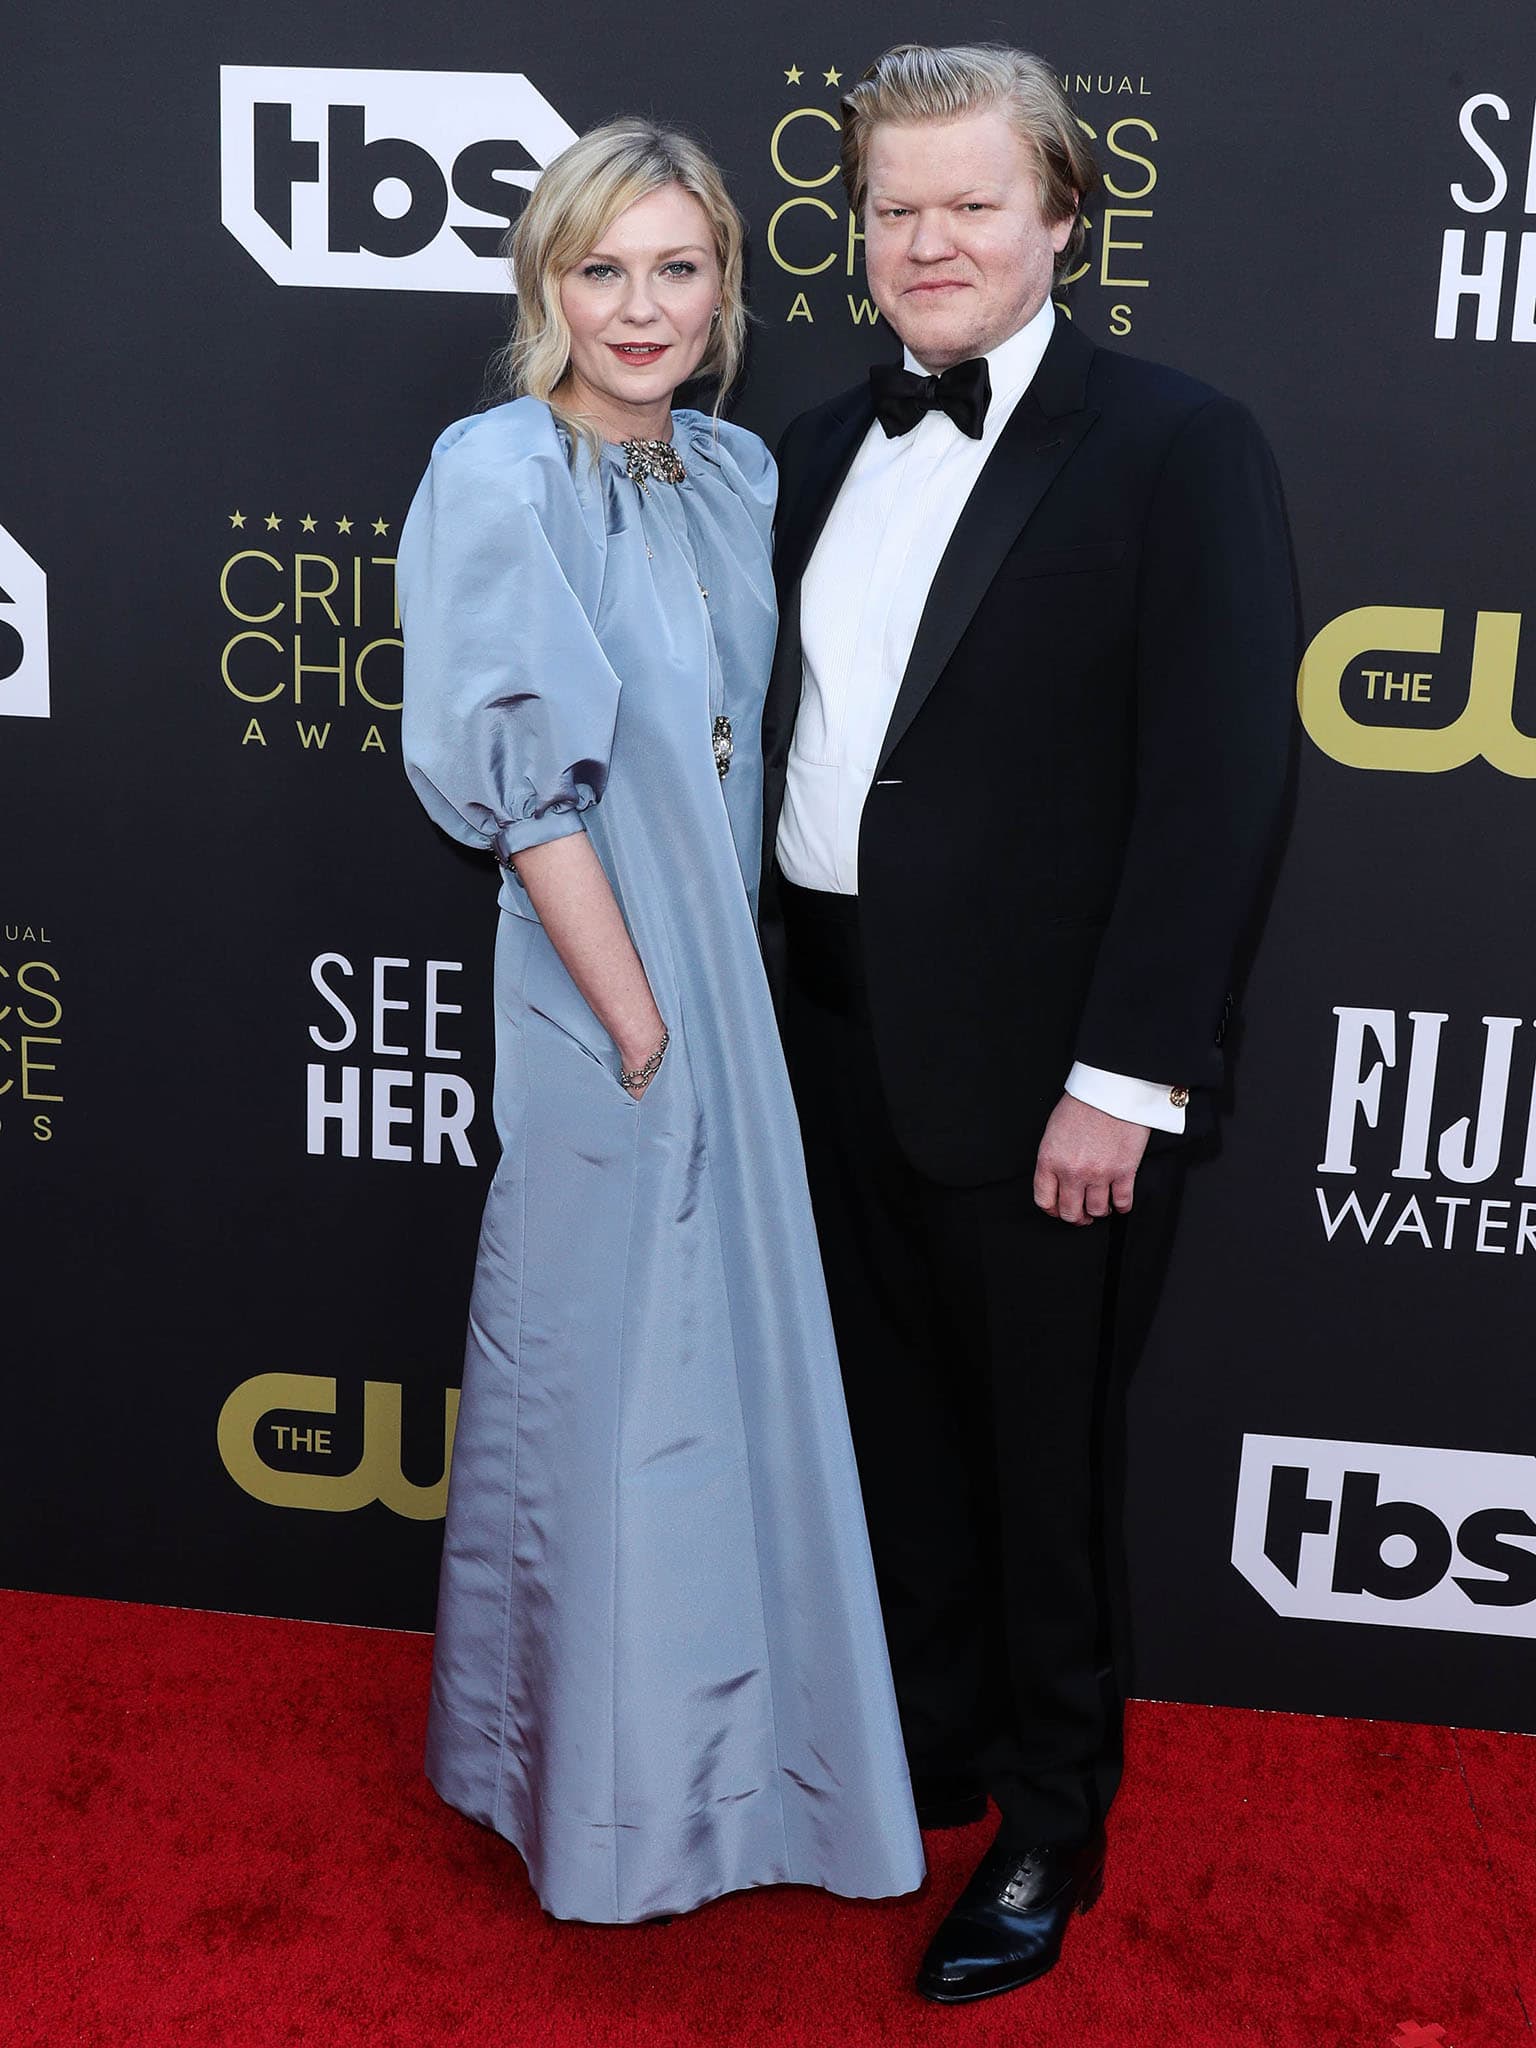 Kirsten Dunst and fiance Jesse Plemons pose together at the Critics' Choice Awards on March 13, 2022